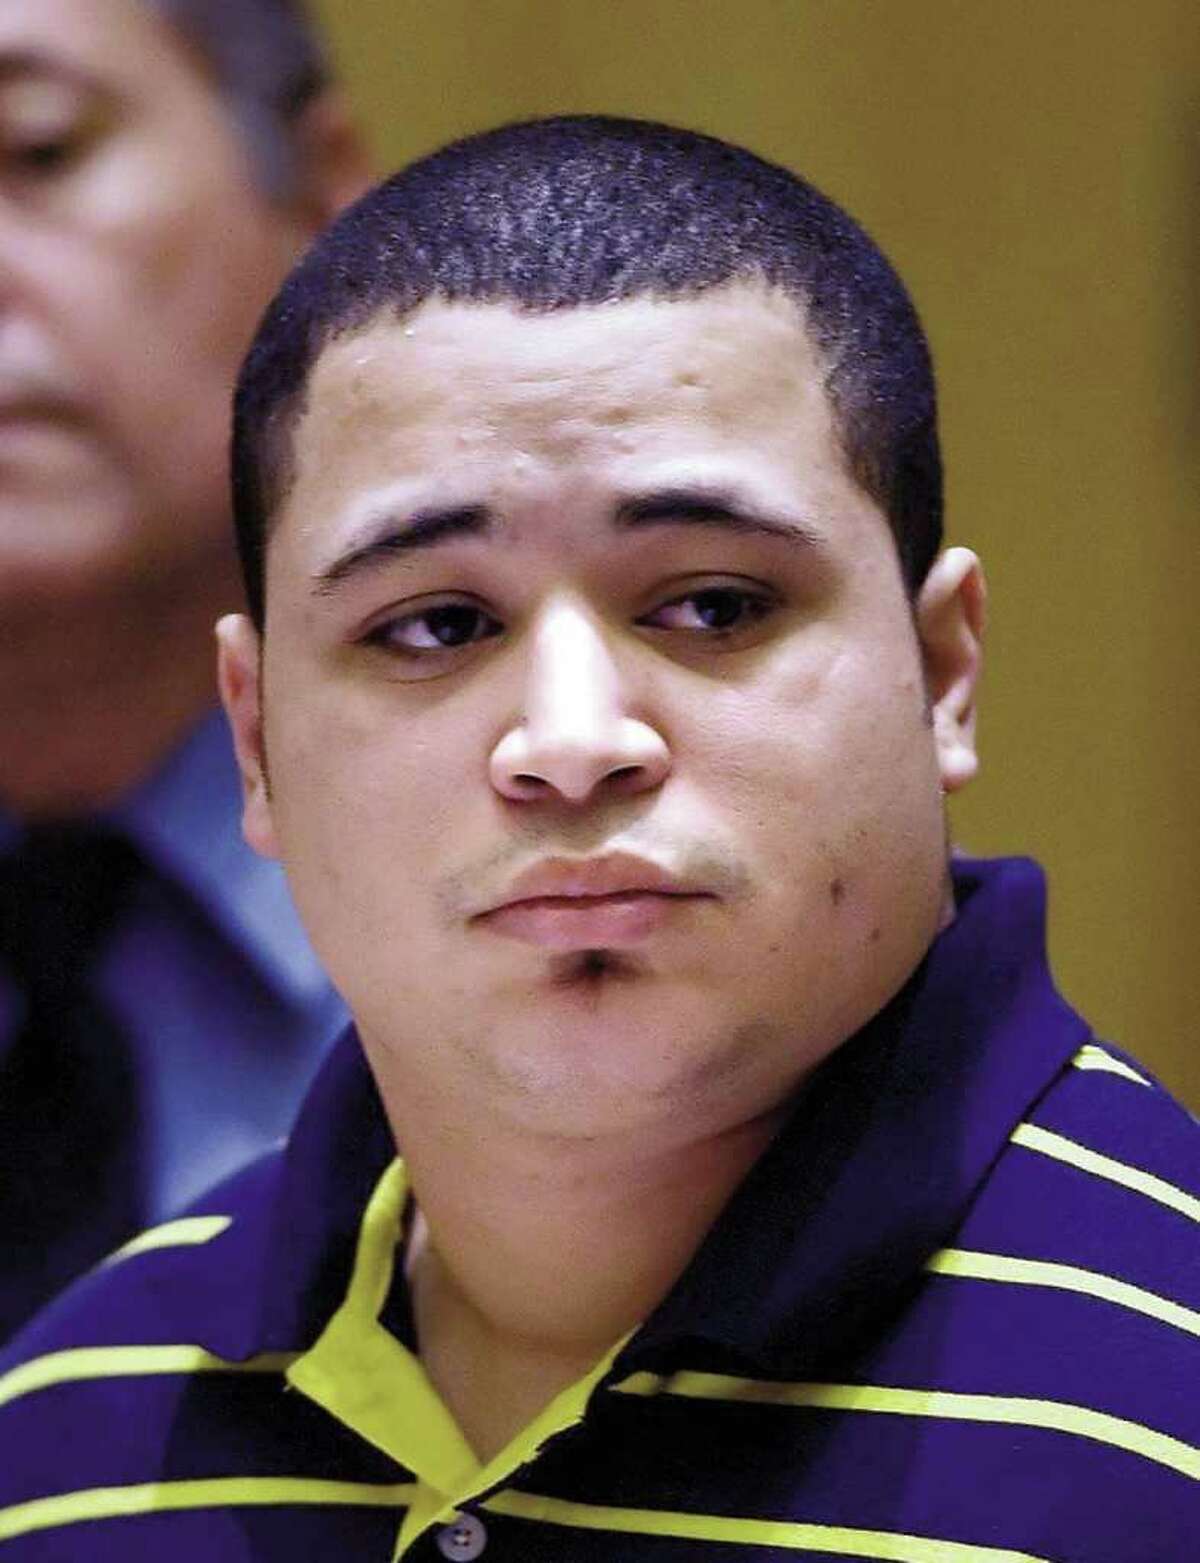 In this March 2008 file photo, Leonard Trujillo, of Worcester, Mass., appears in connection with the murder of Andrew Kissel, in state Superior Court in Stamford. Trujillo testified Thursday in Stamford in the trial of his cousin, Carlos Trujillo, who is accused in Kissel's death. (AP Photo/Douglas Healey)